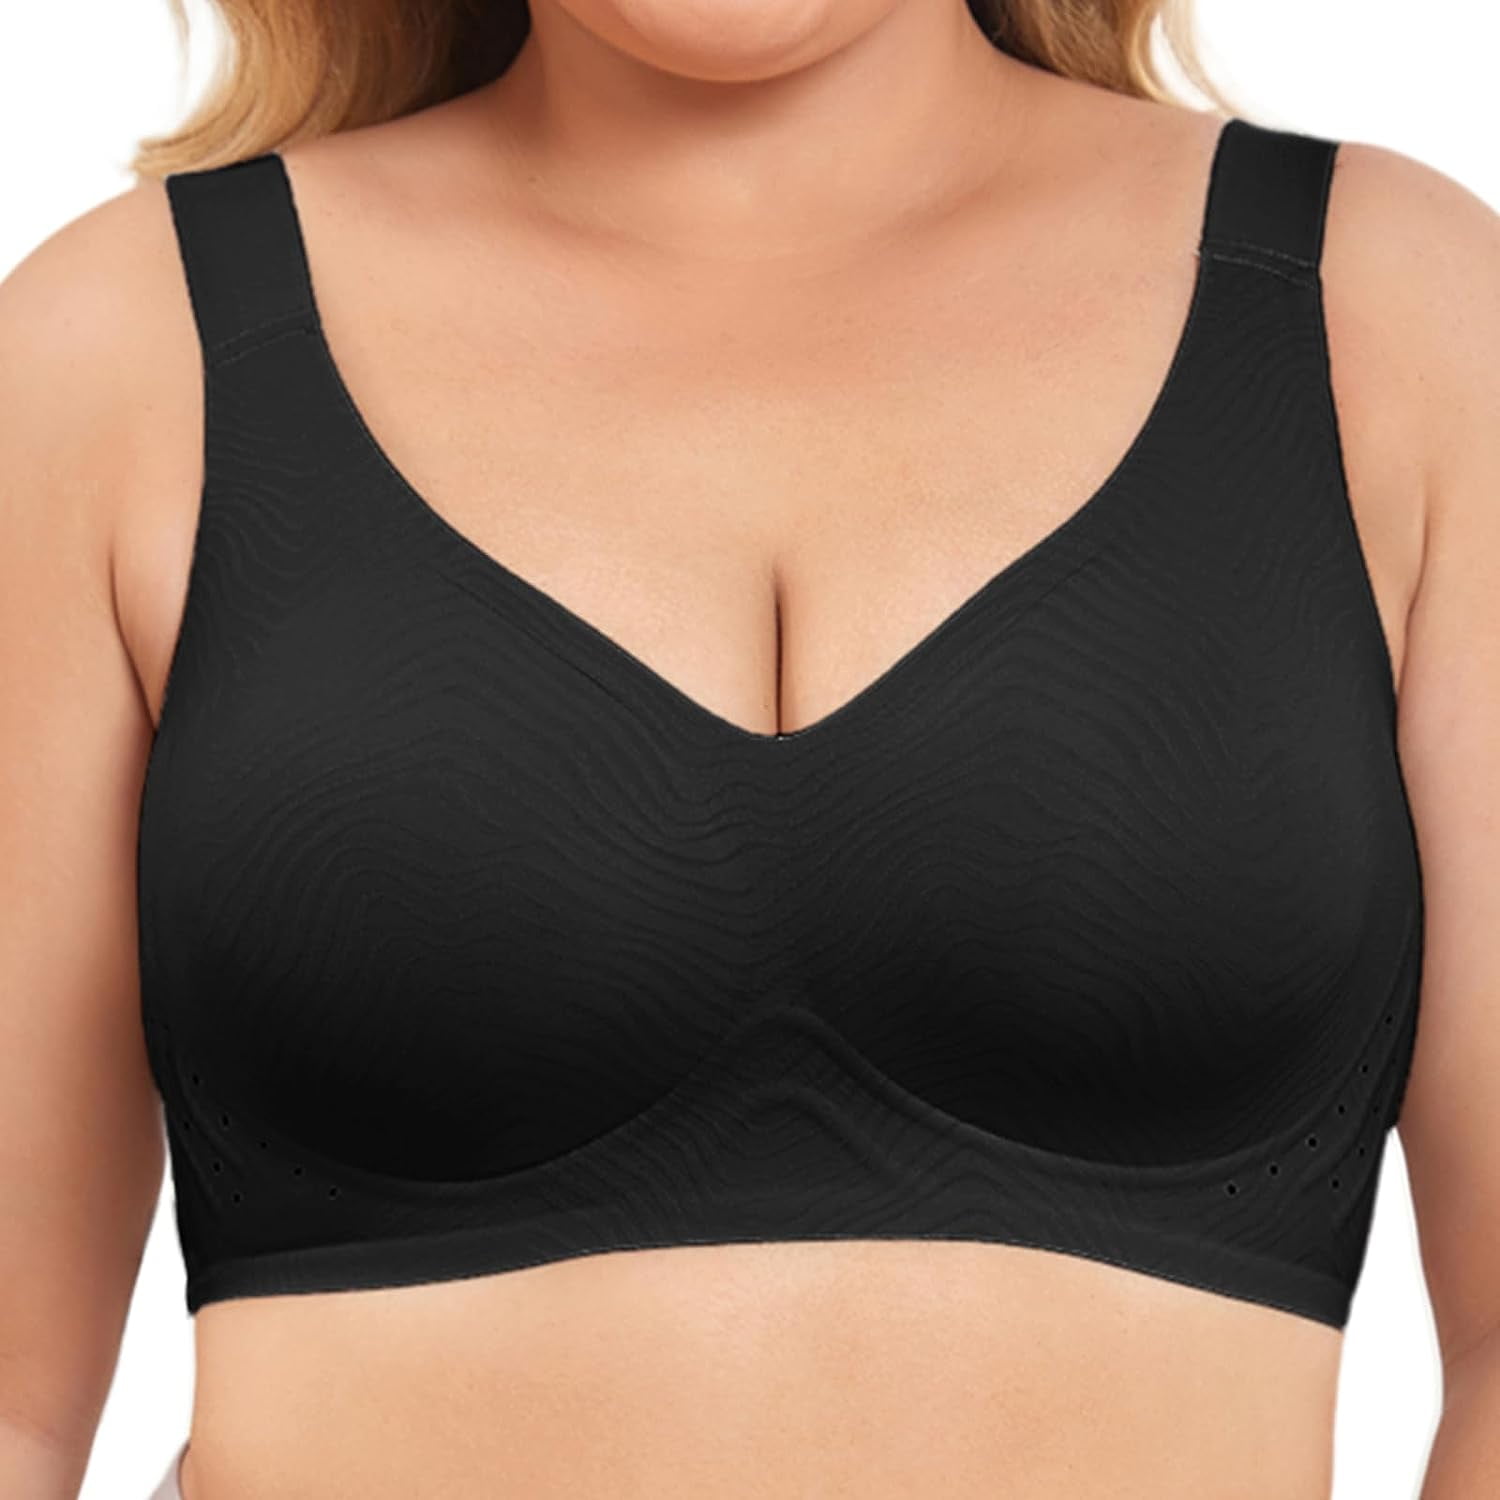 EHQJNJ Black Bralette for under Sheer Shirt Push up Women Fashion Casual  Breathable Tube Top Bra Underwear Without Steel Ring Gathering and  Adjusting